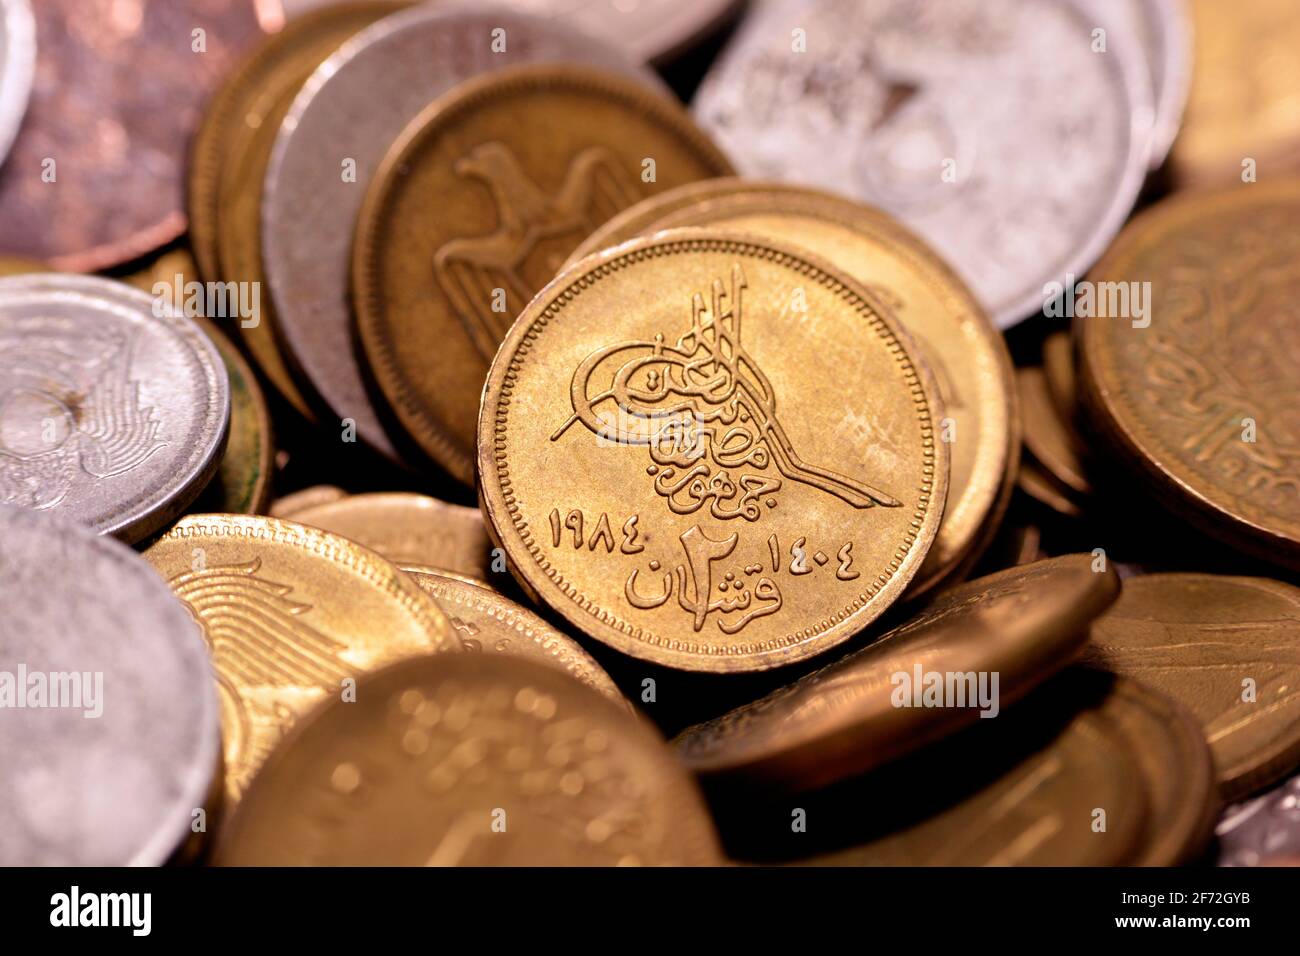 two Egyptian piasters coin 1984 (observe side of the coin), old Egyptian money of 2 piasters coin, vintage retro, old Egyptian coins Stock Photo